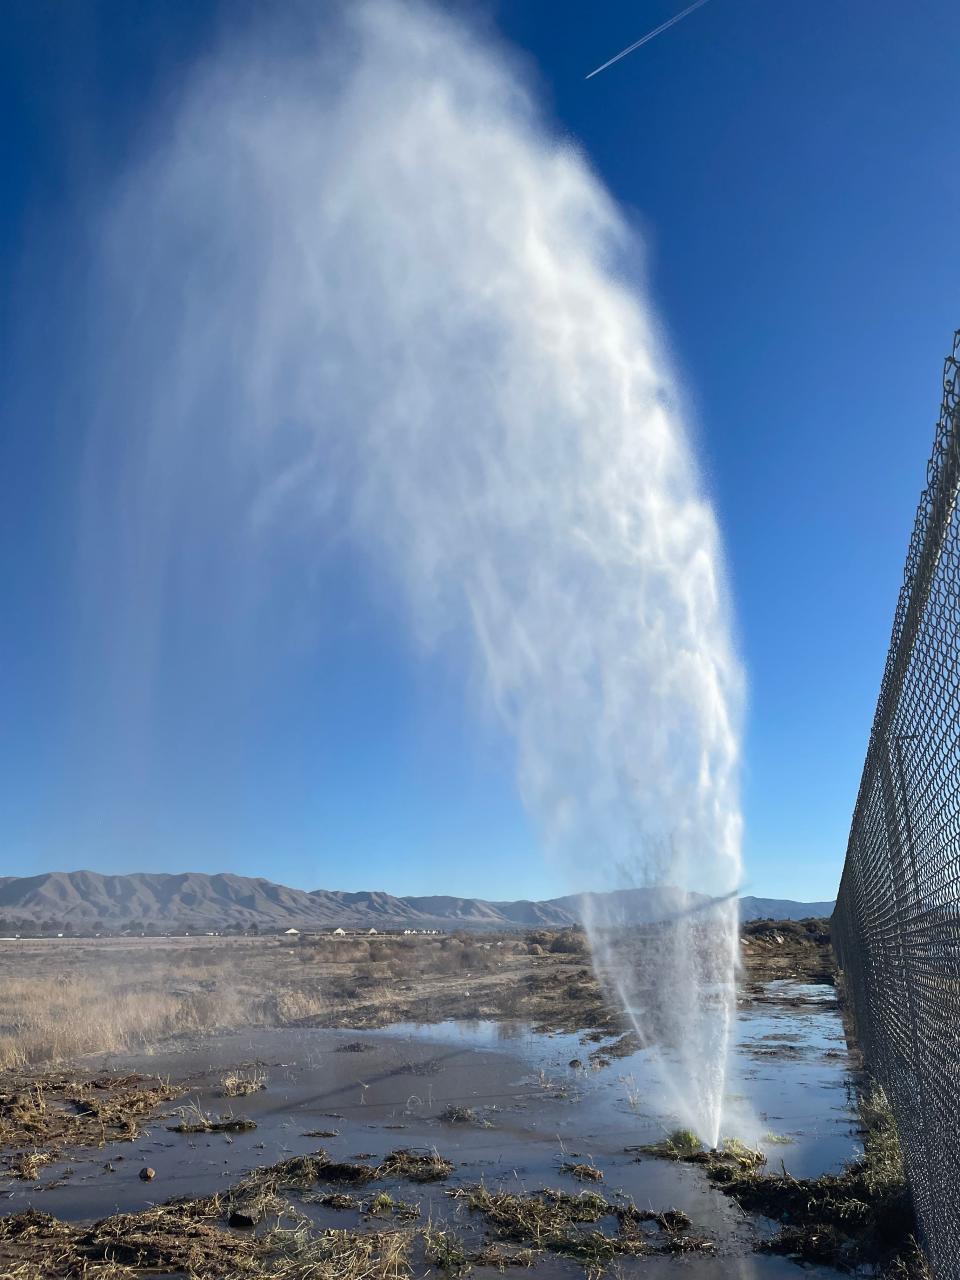 Thousands of residents were drawn to the sight of water spewing high into the air from a broken water line near a shopping center in Hesperia. Many described the sight as a "geyser" or "water fountain," which created a rainbow.